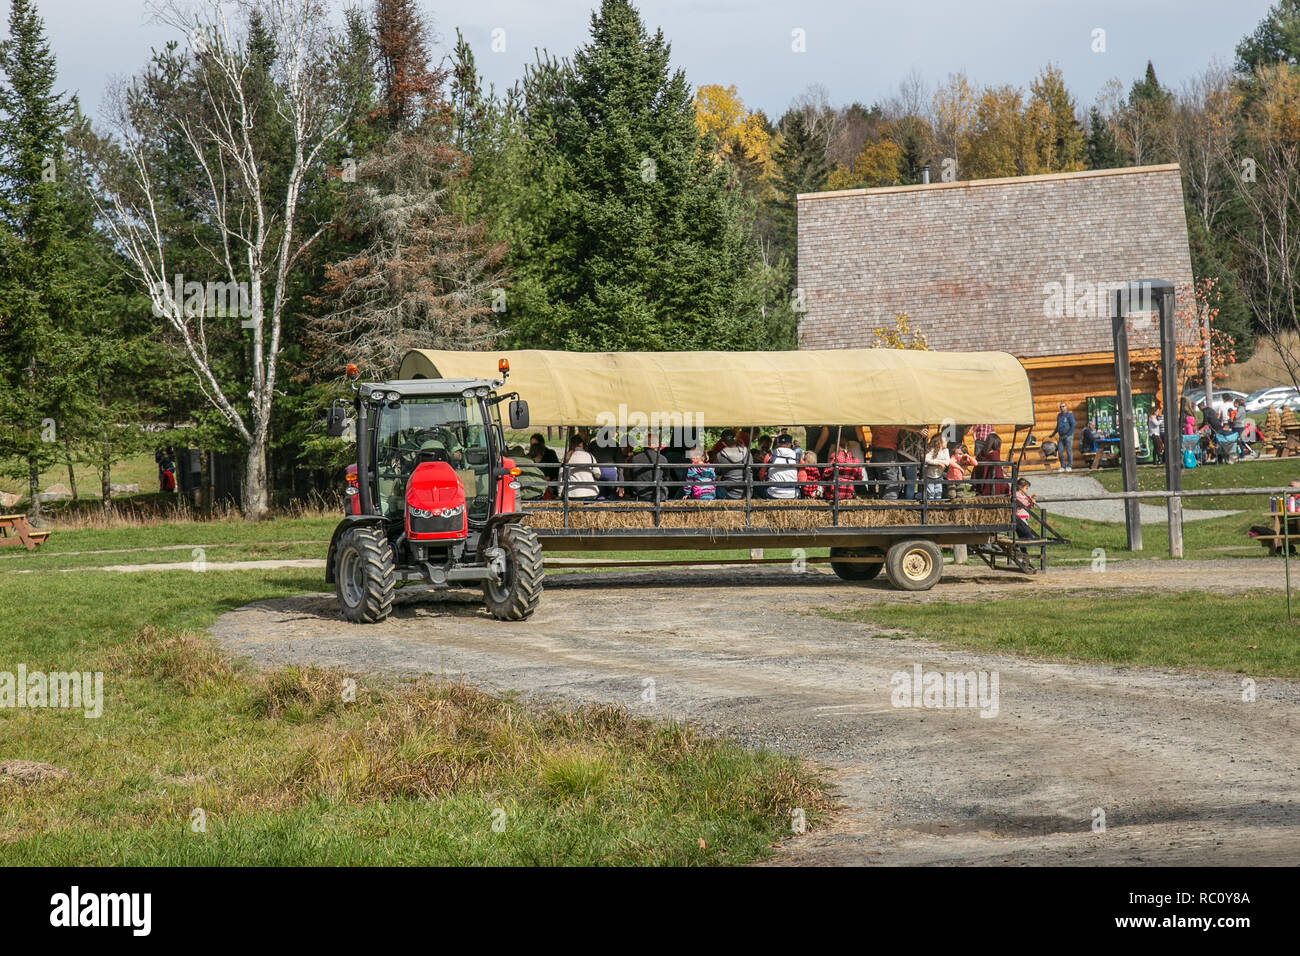 Omega park in Quebec, carriage with people starting tour round the park Stock Photo